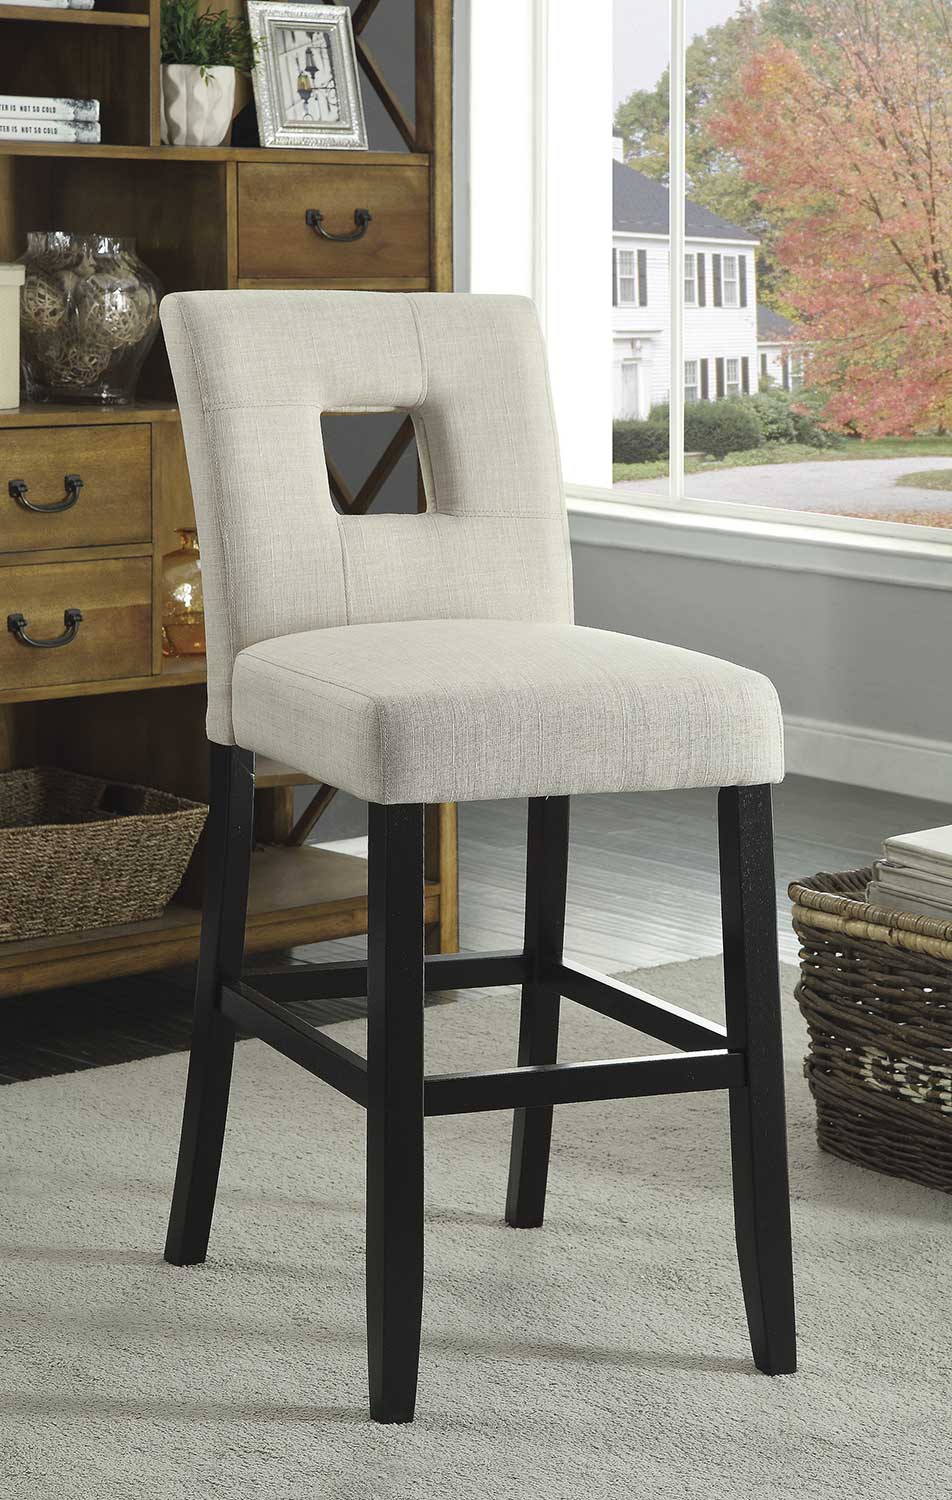 Coaster Andenne Counter Height Chair - Beige/Black